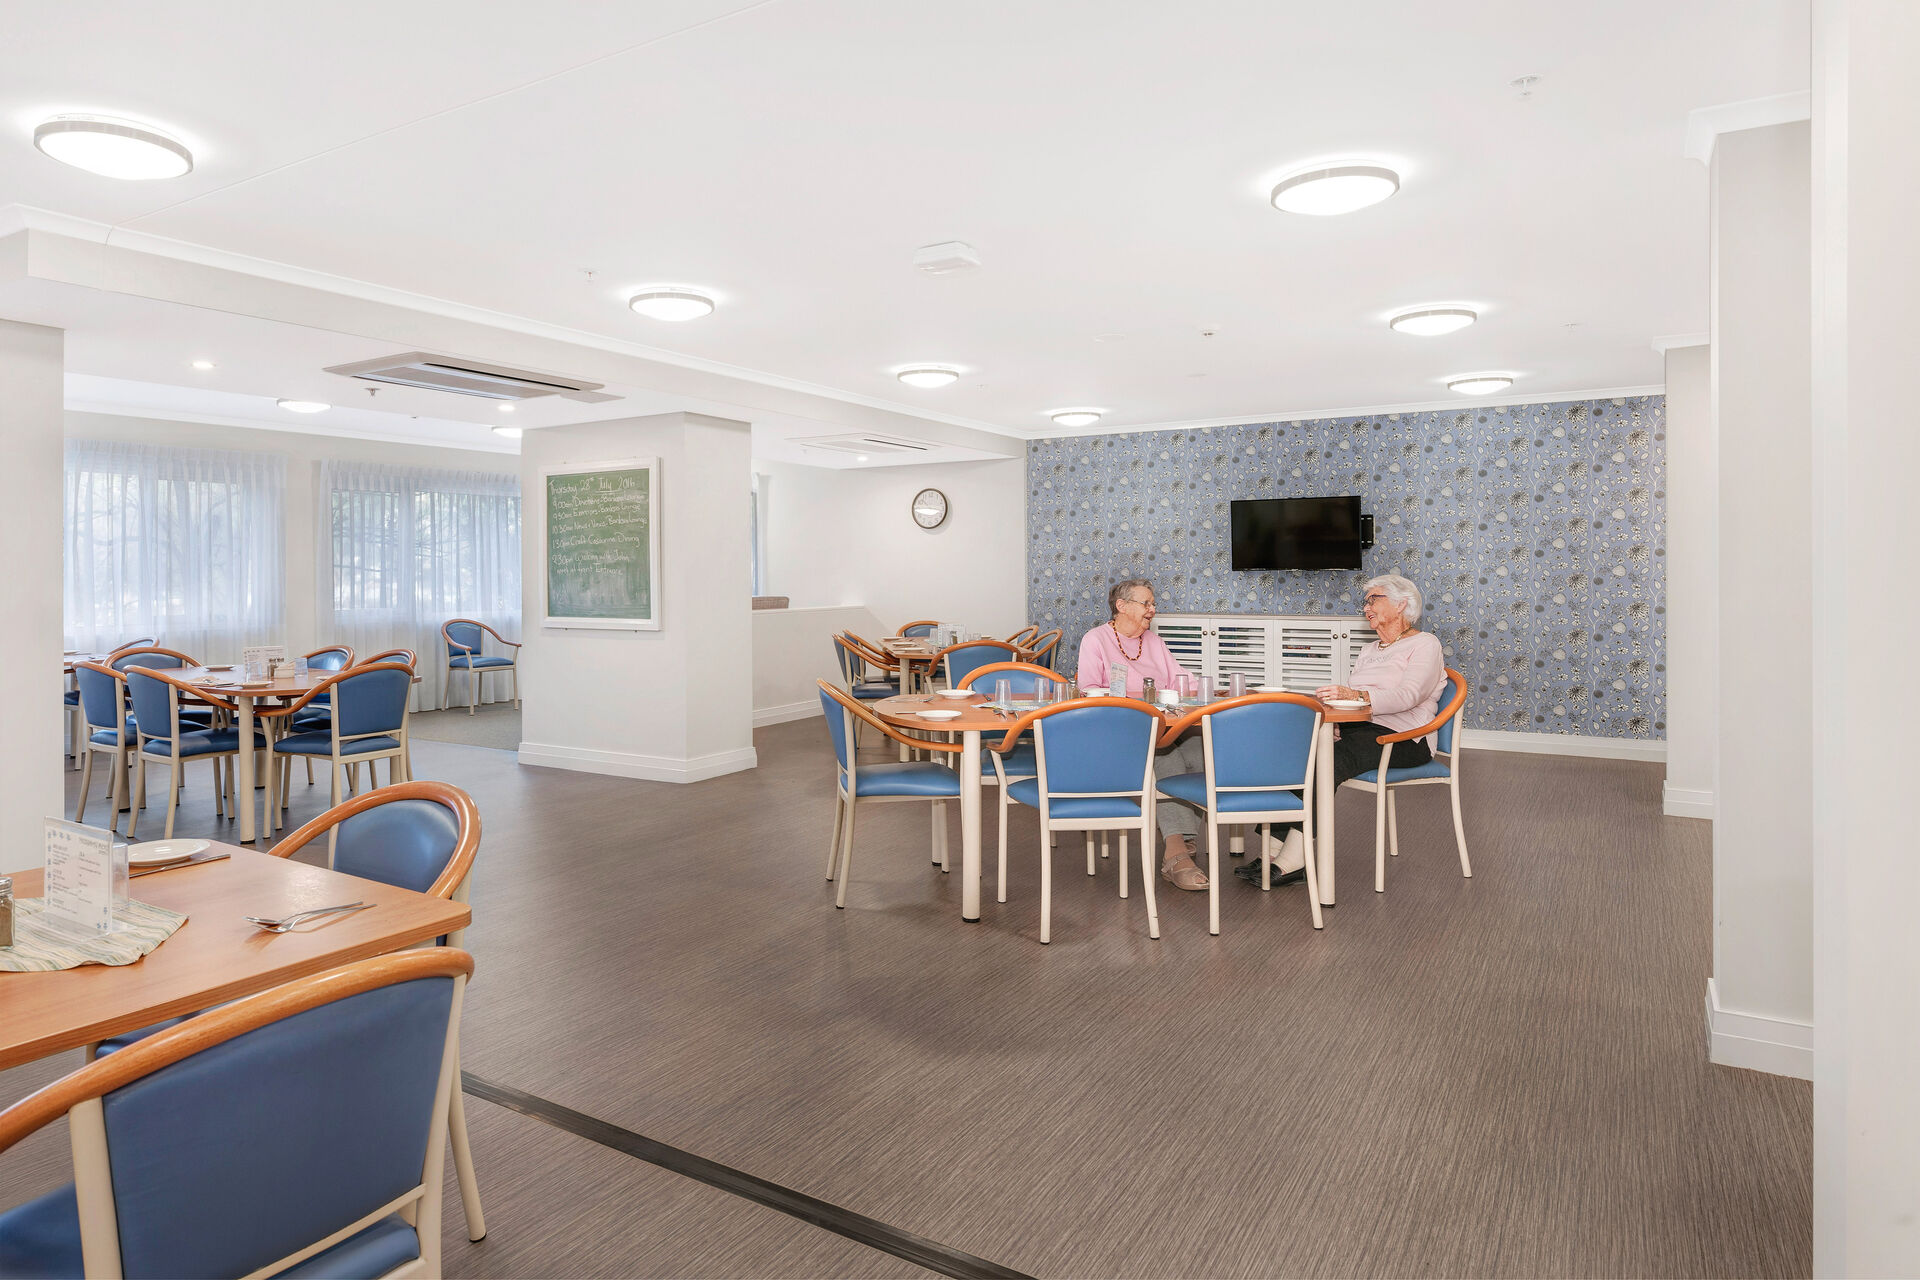 communal dining room for aged care residents to be served fresh meals at baptistcare orana centre aged care home in point clare nsw central coast